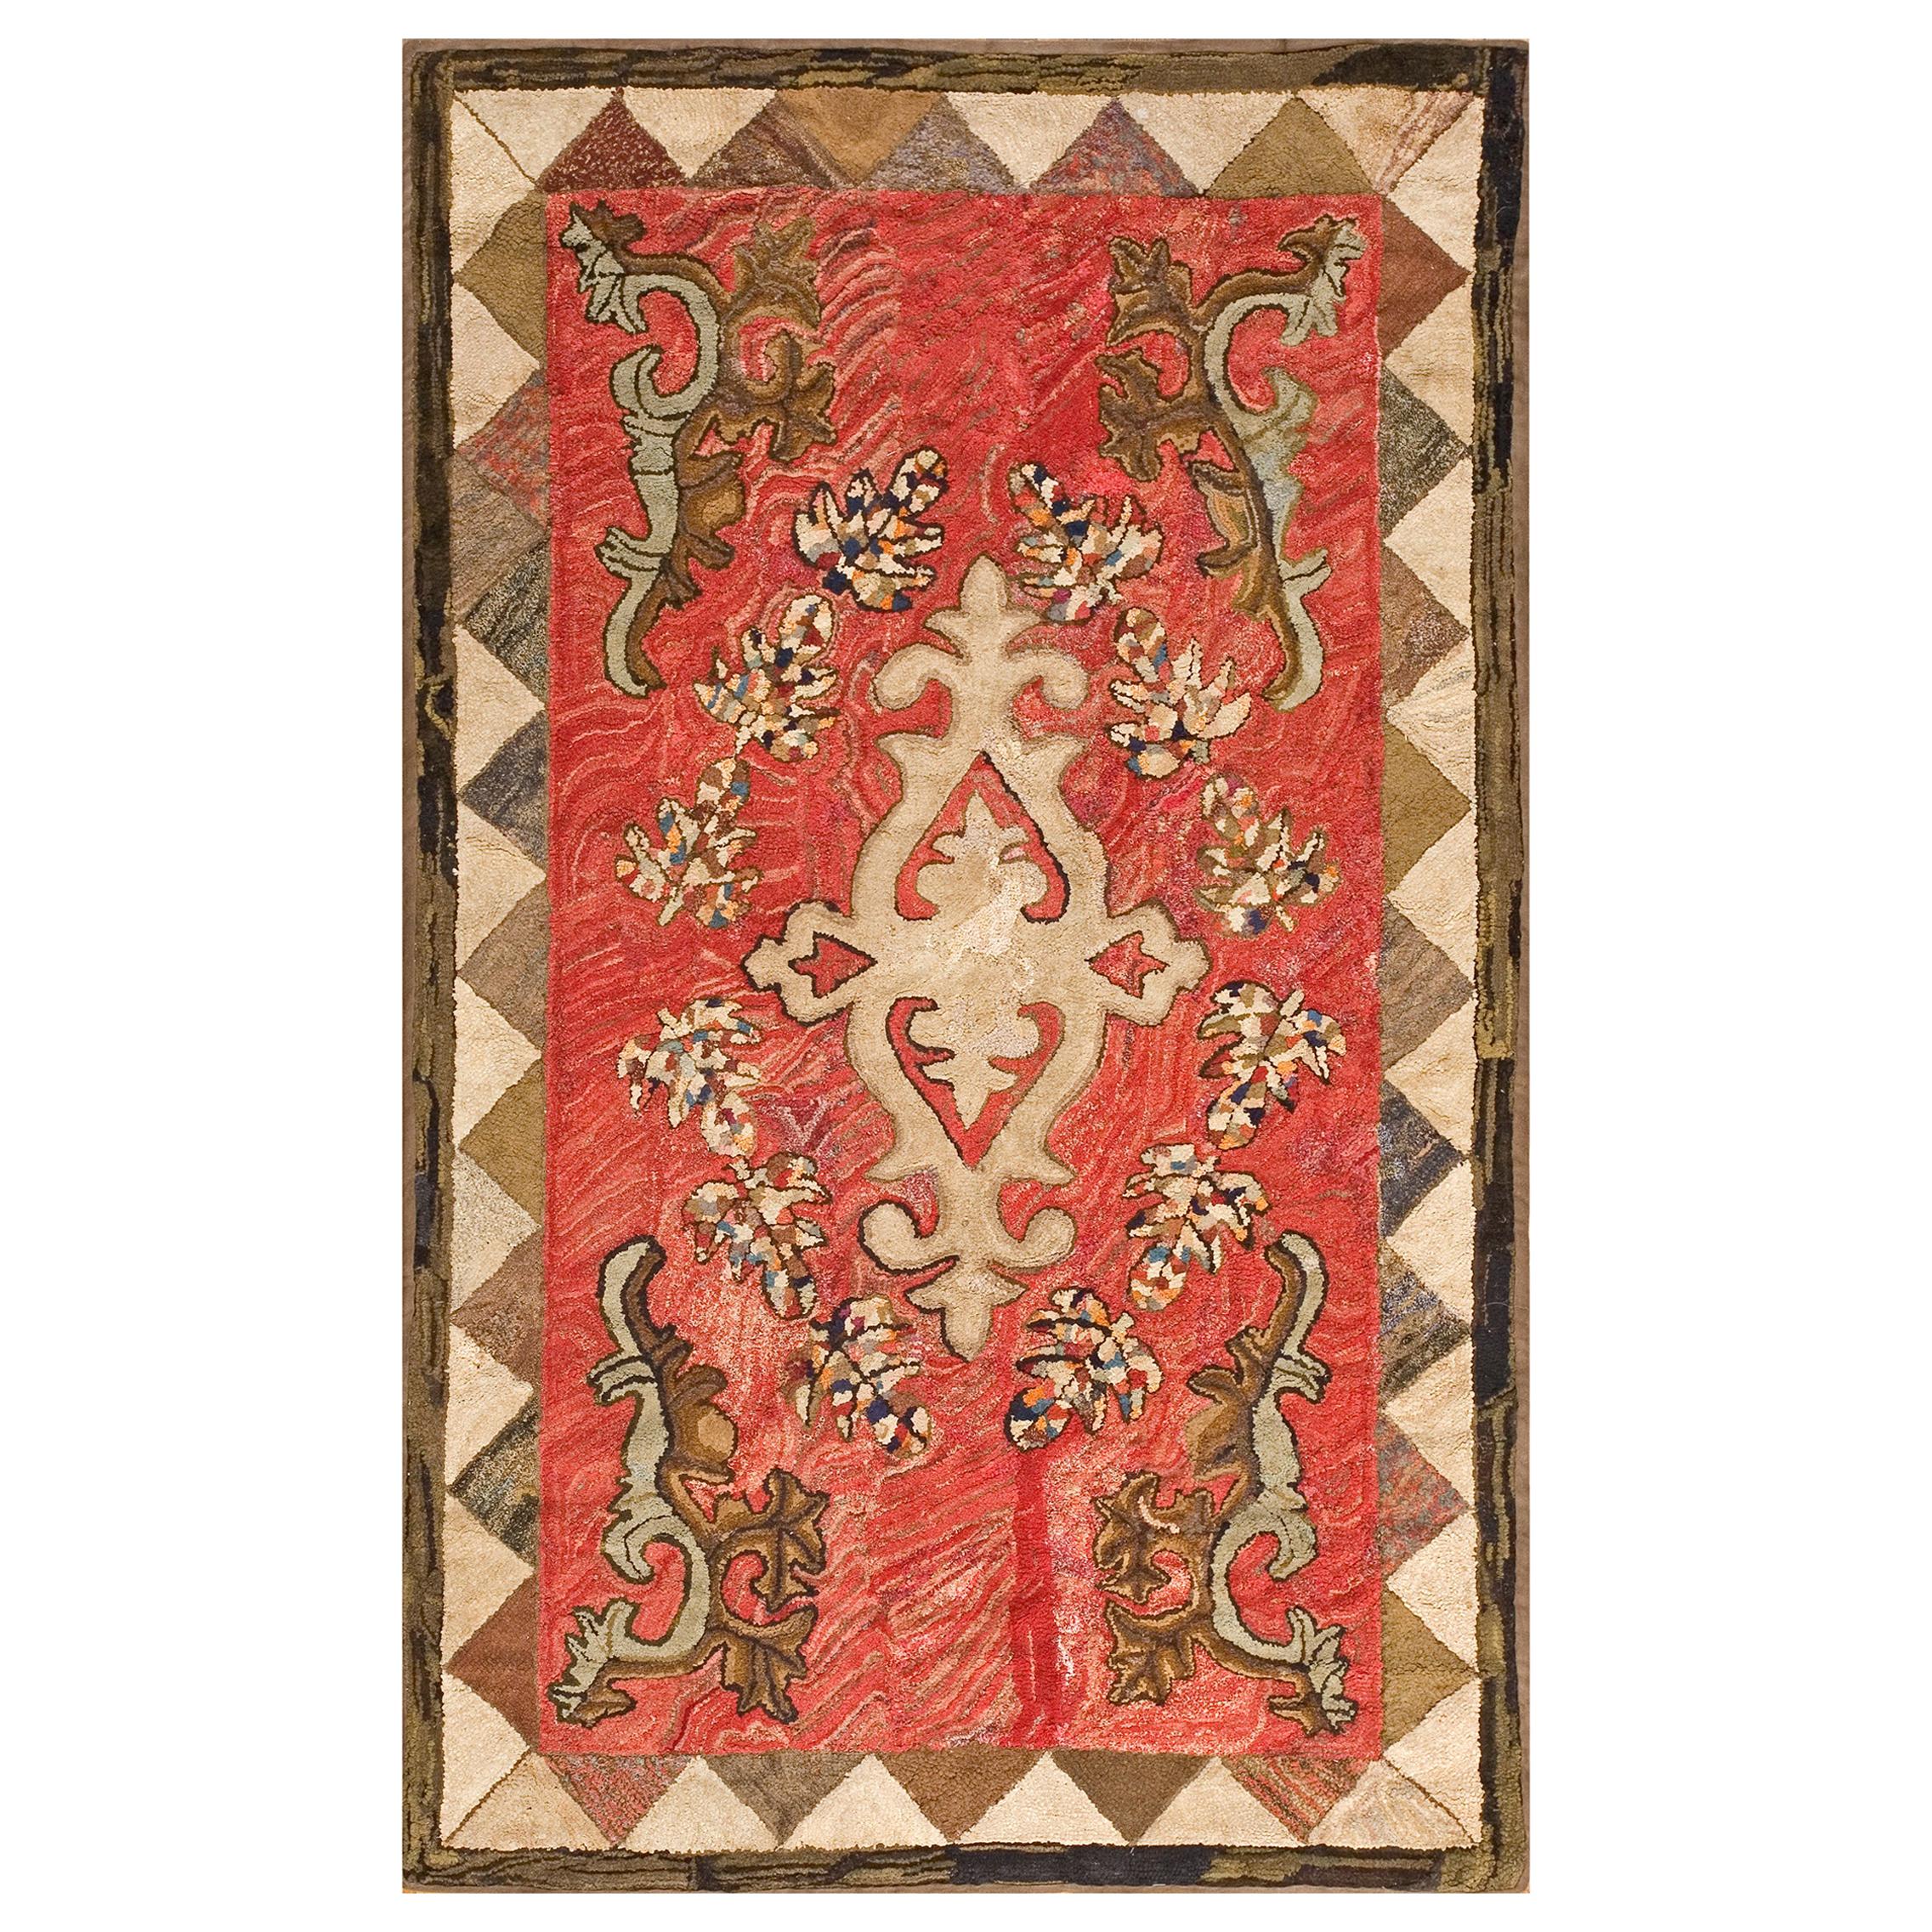 Early 20th Century American Hooked Rug ( 4'4" x 7'4" - 132 x 223 cm )